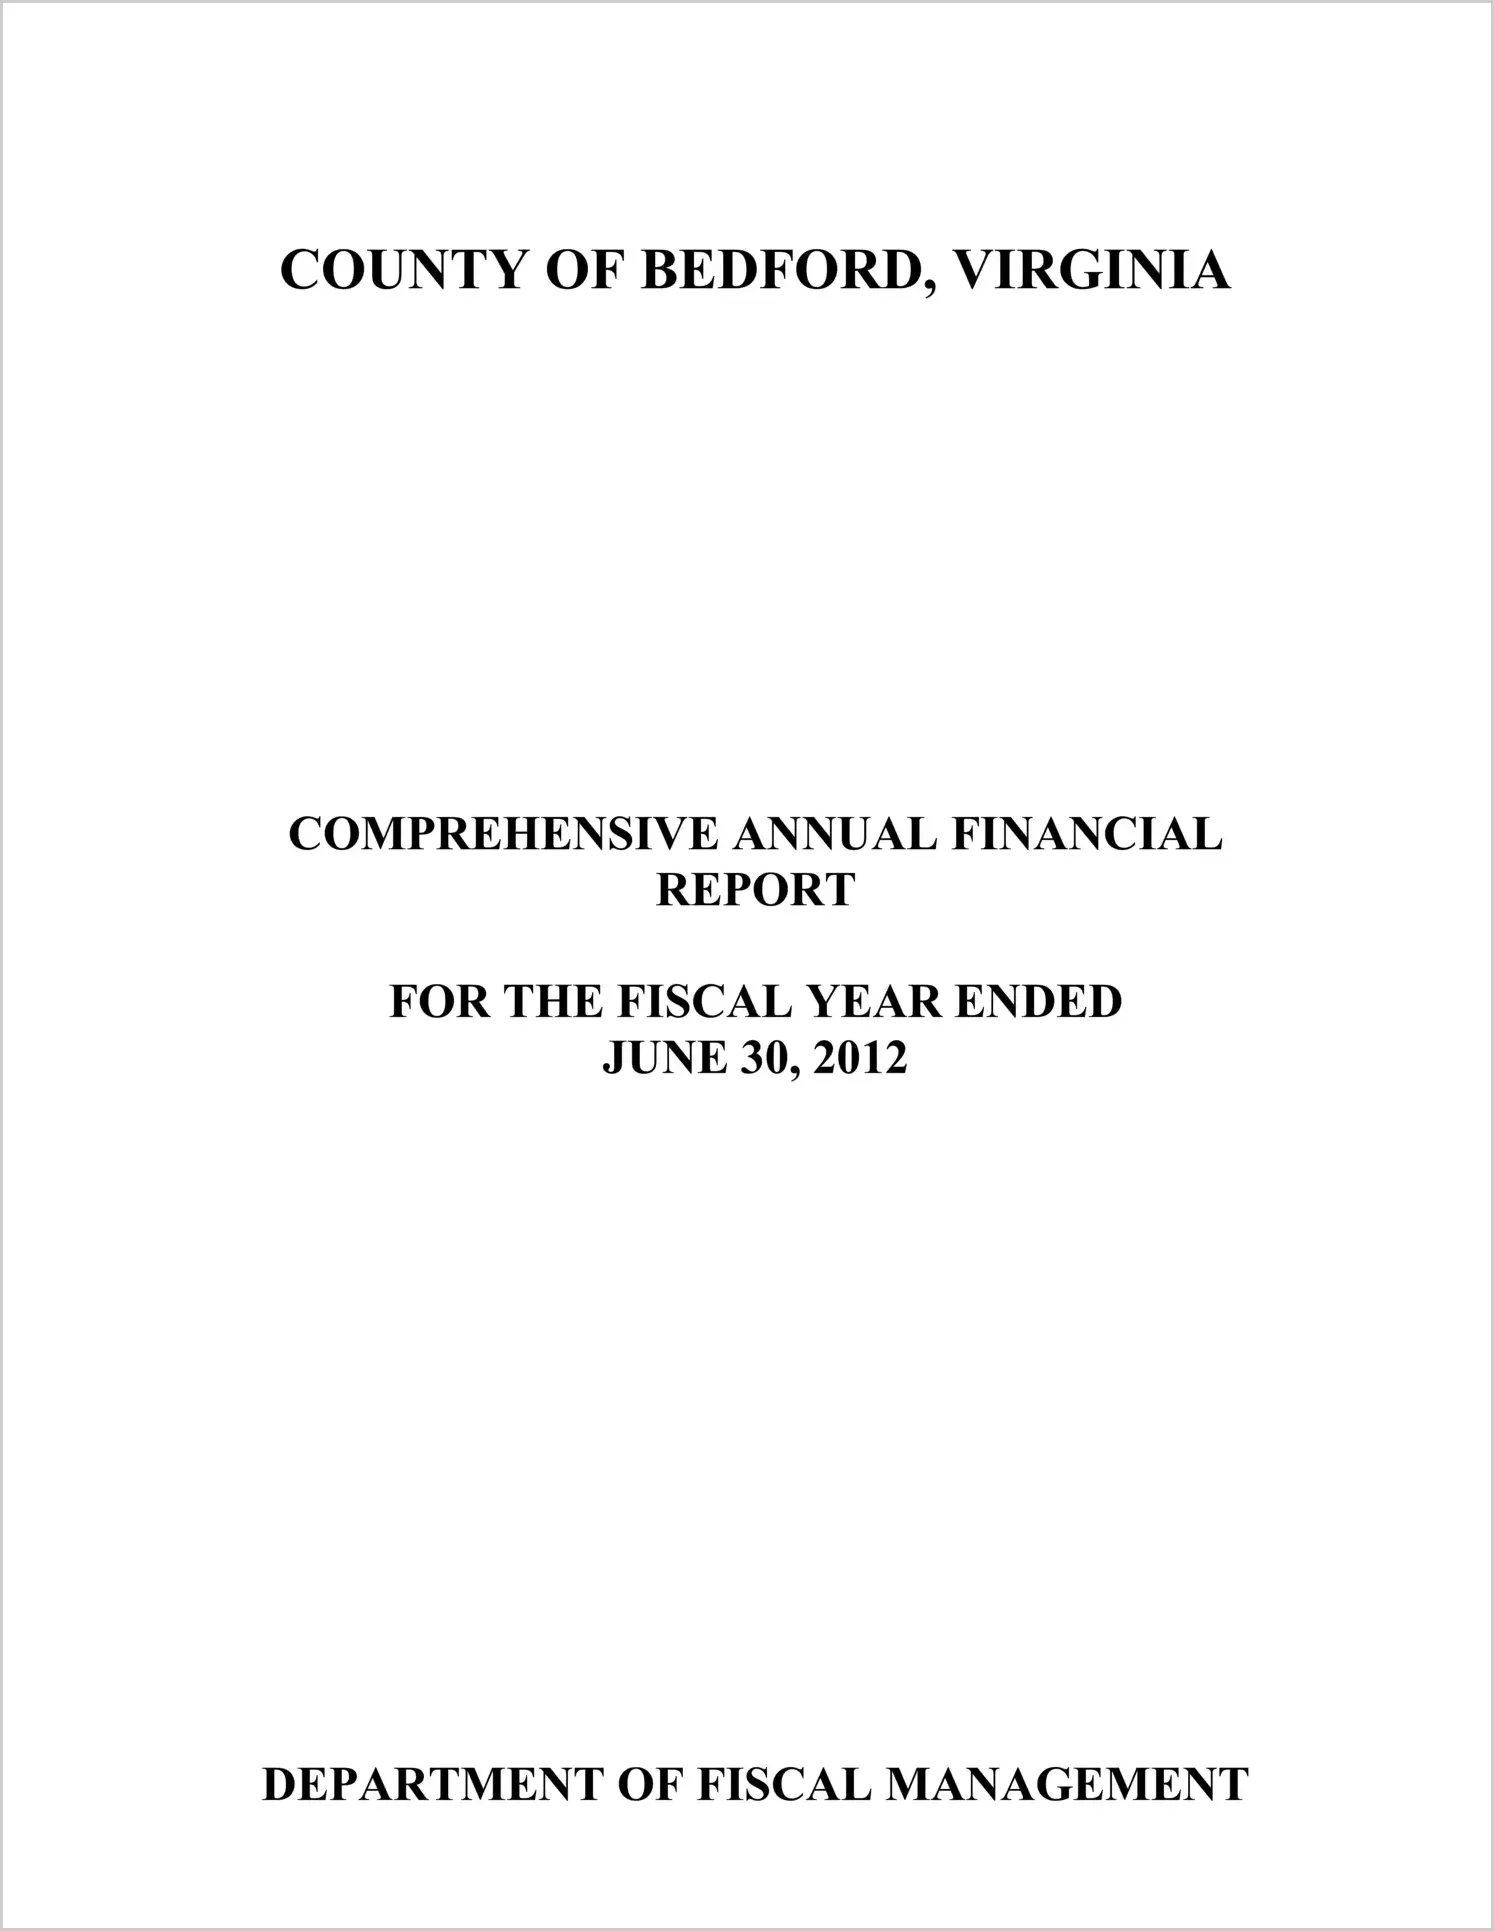 2012 Annual Financial Report for County of Bedford